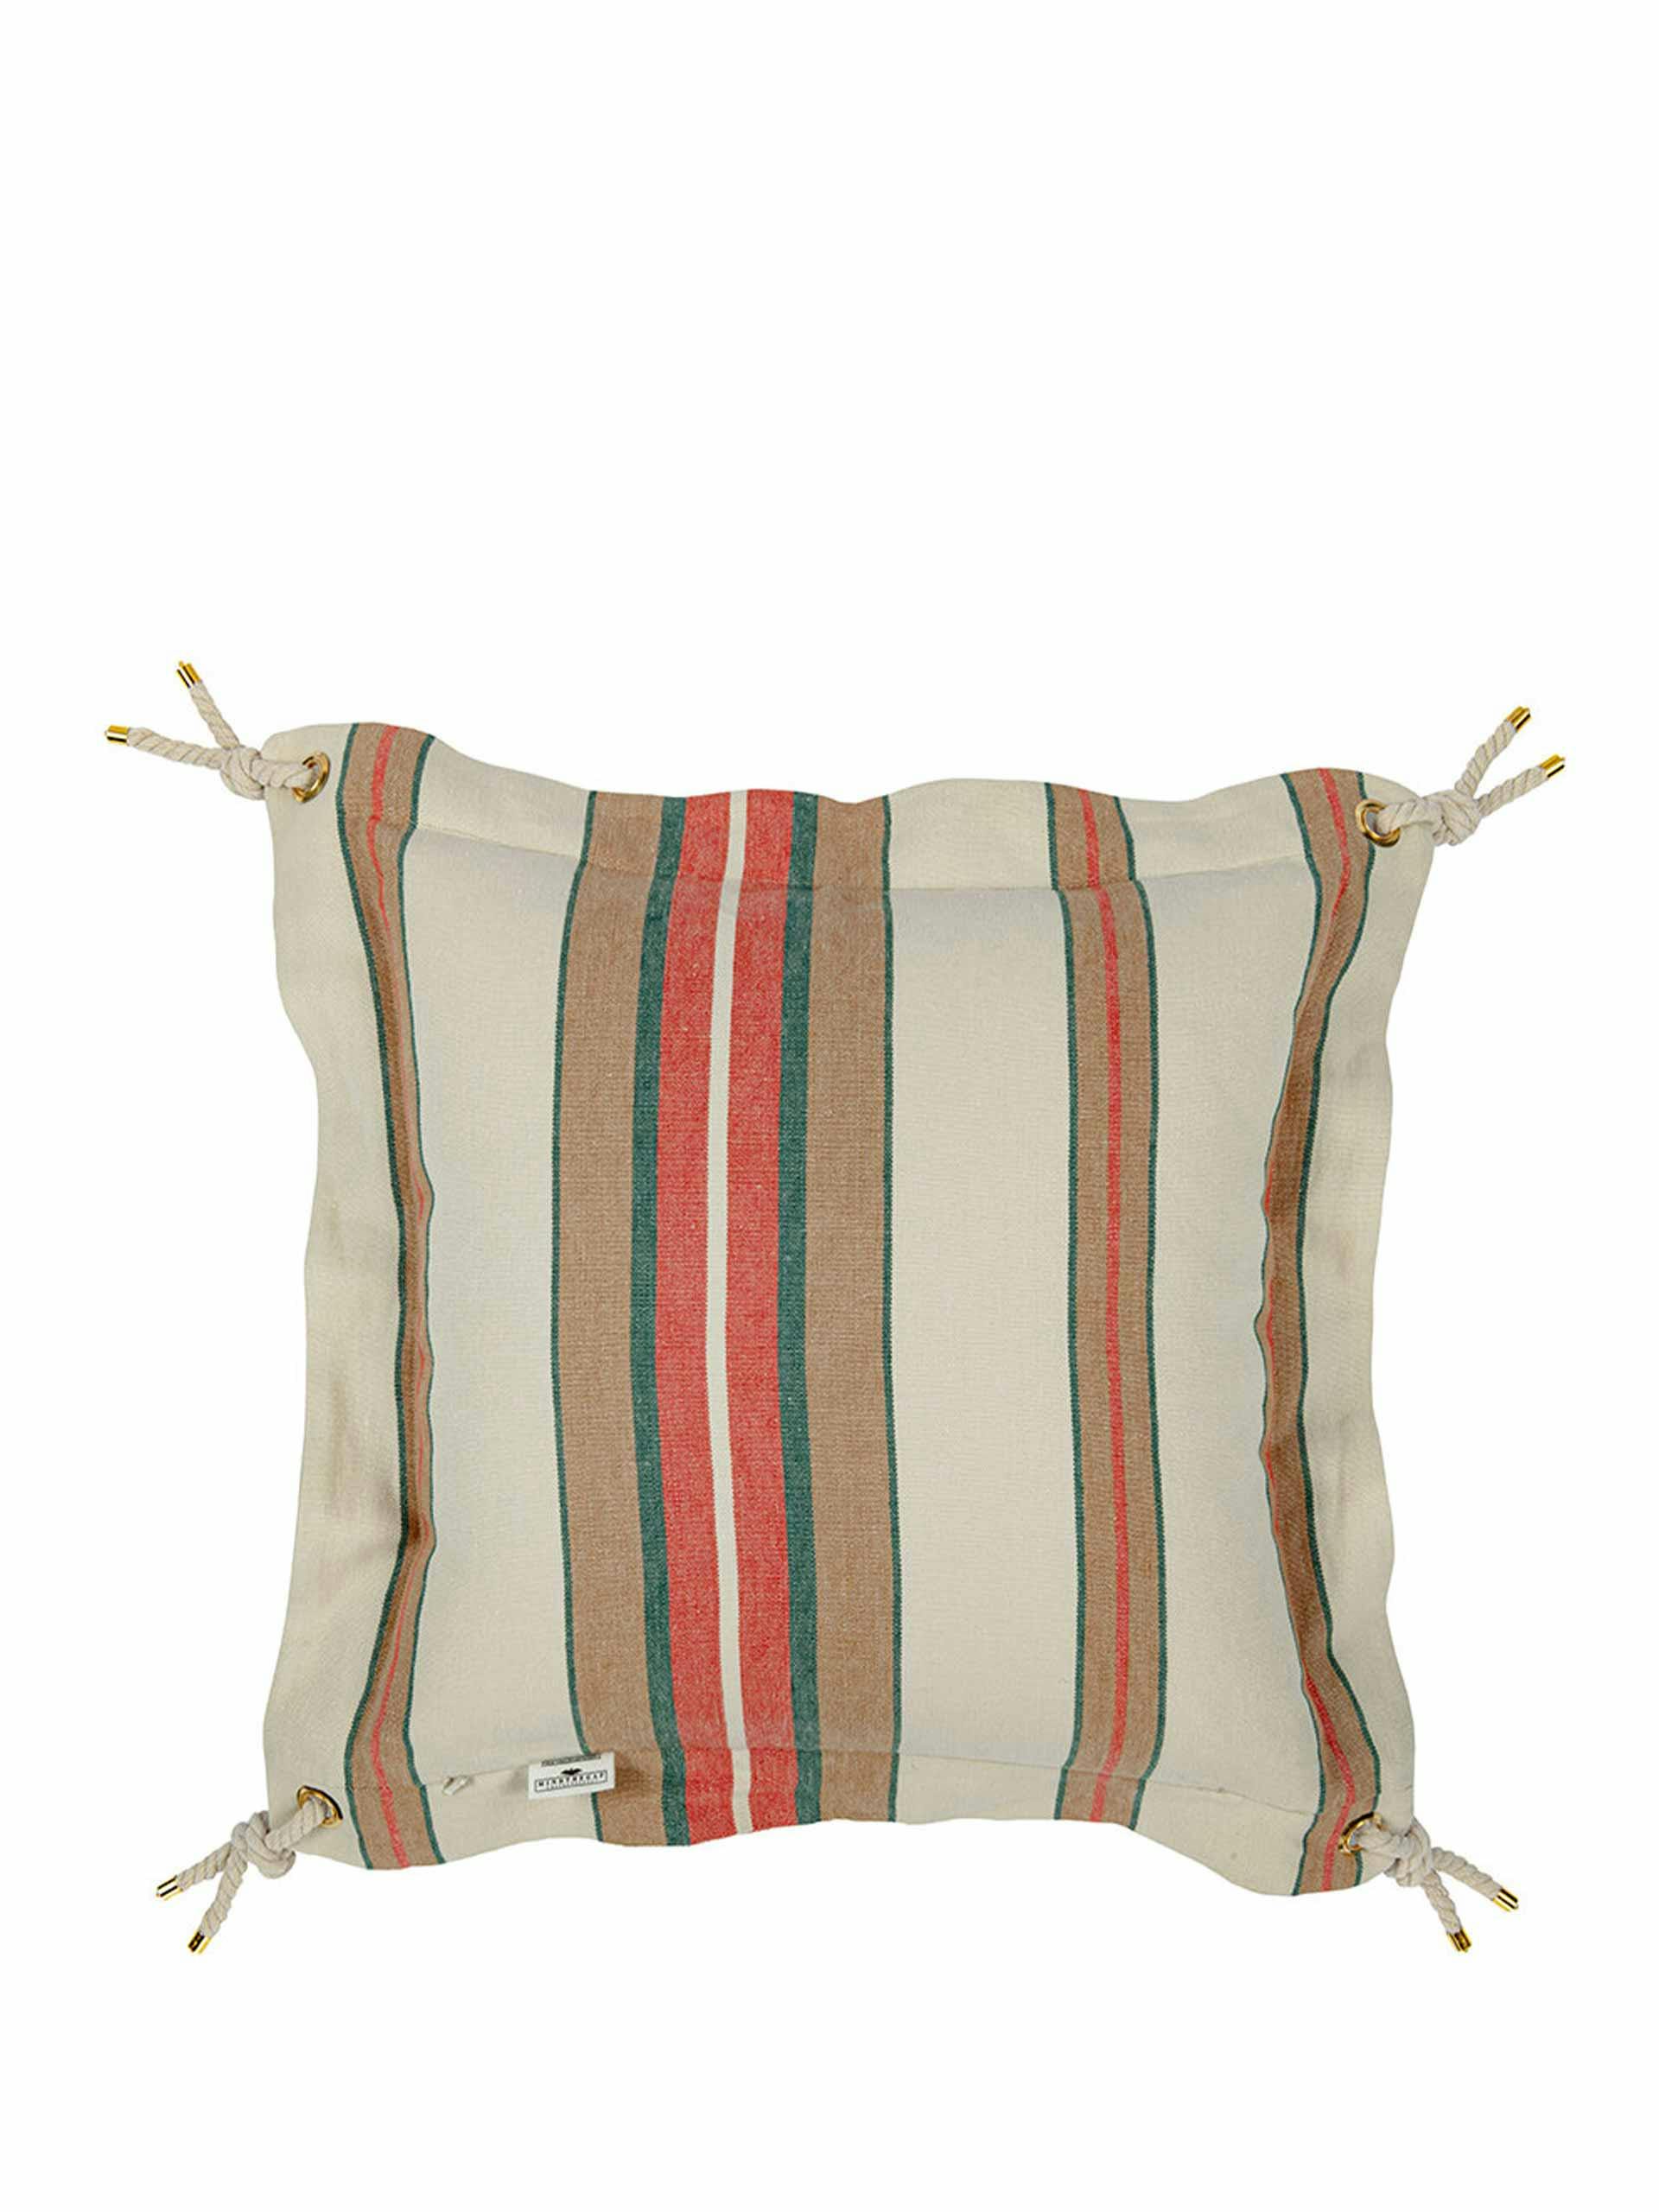 Stripe cushion with duck feather filling